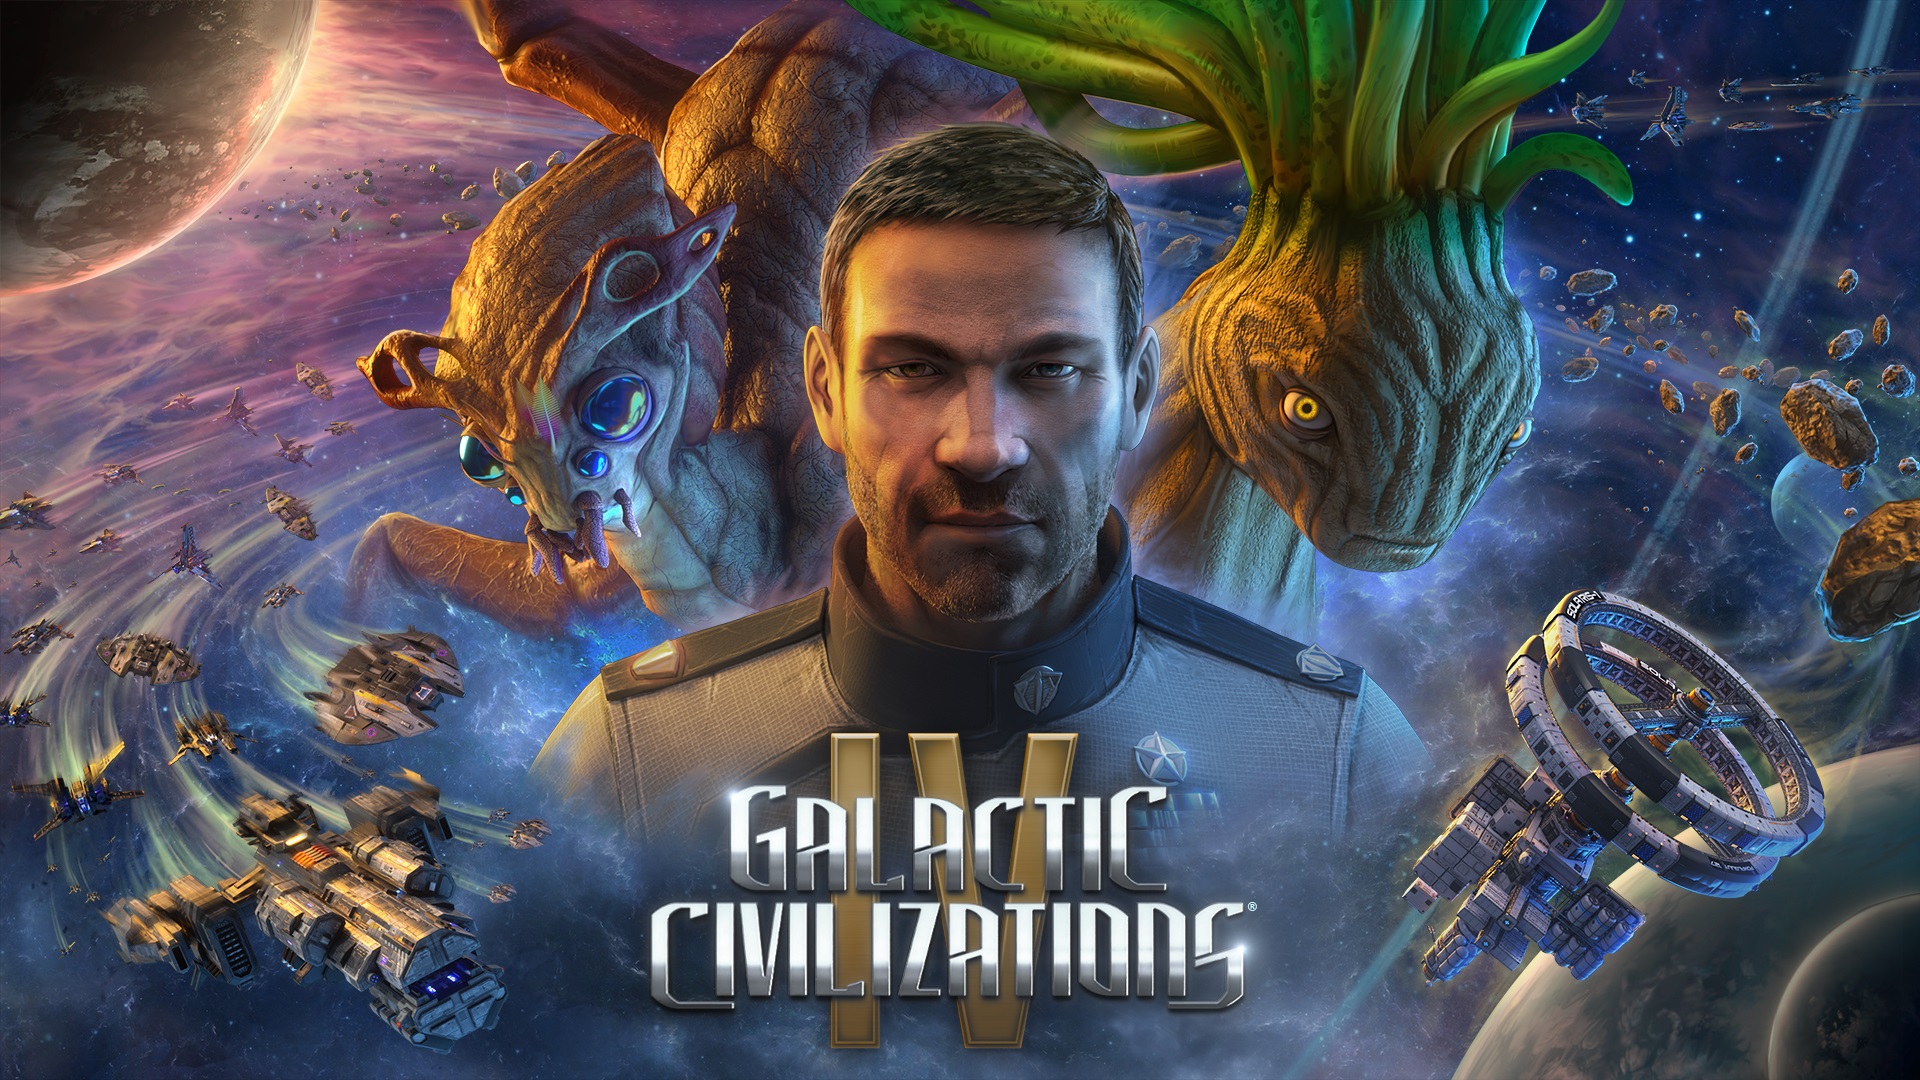 Galactic Civilizations 4 Announced, Early Access this Summer